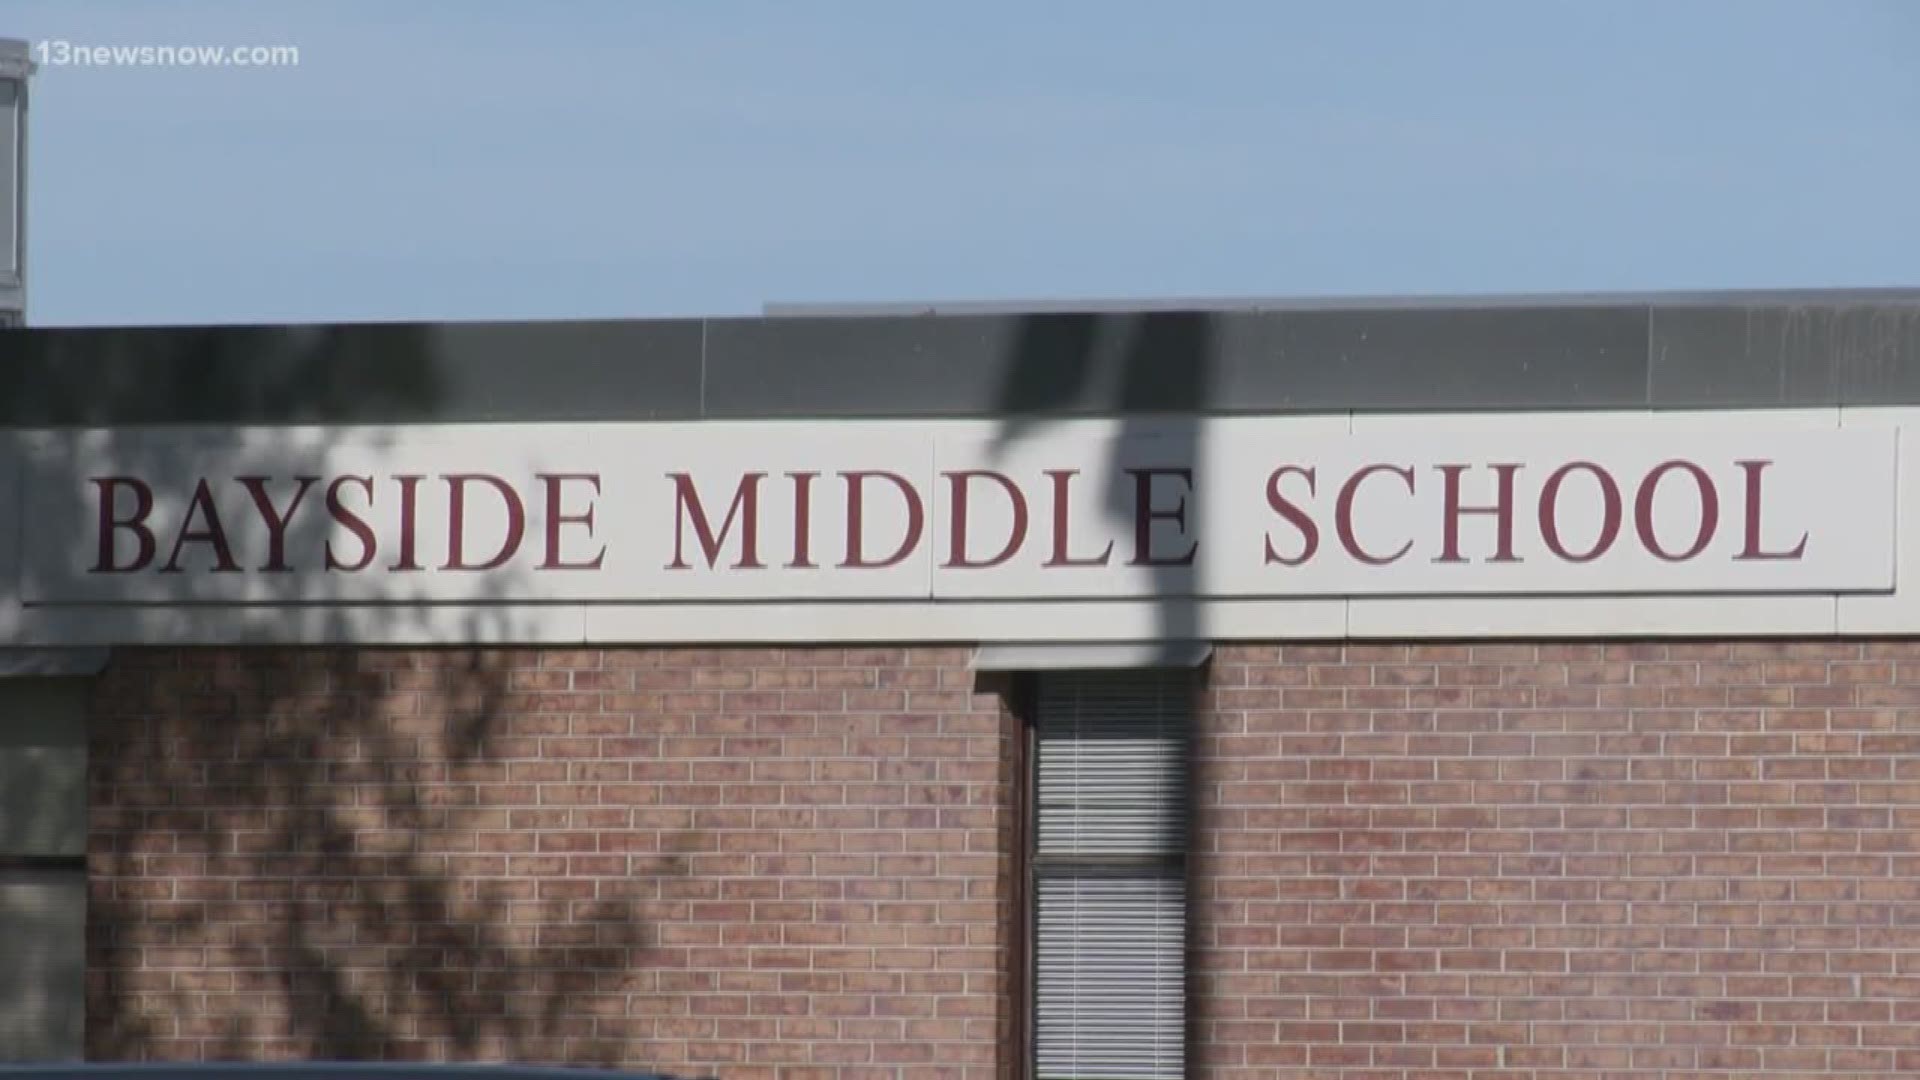 Posts on social media showed someone threatening to blow up Bayside Middle School. Students showed their parents and police were notified. Some students stayed home.